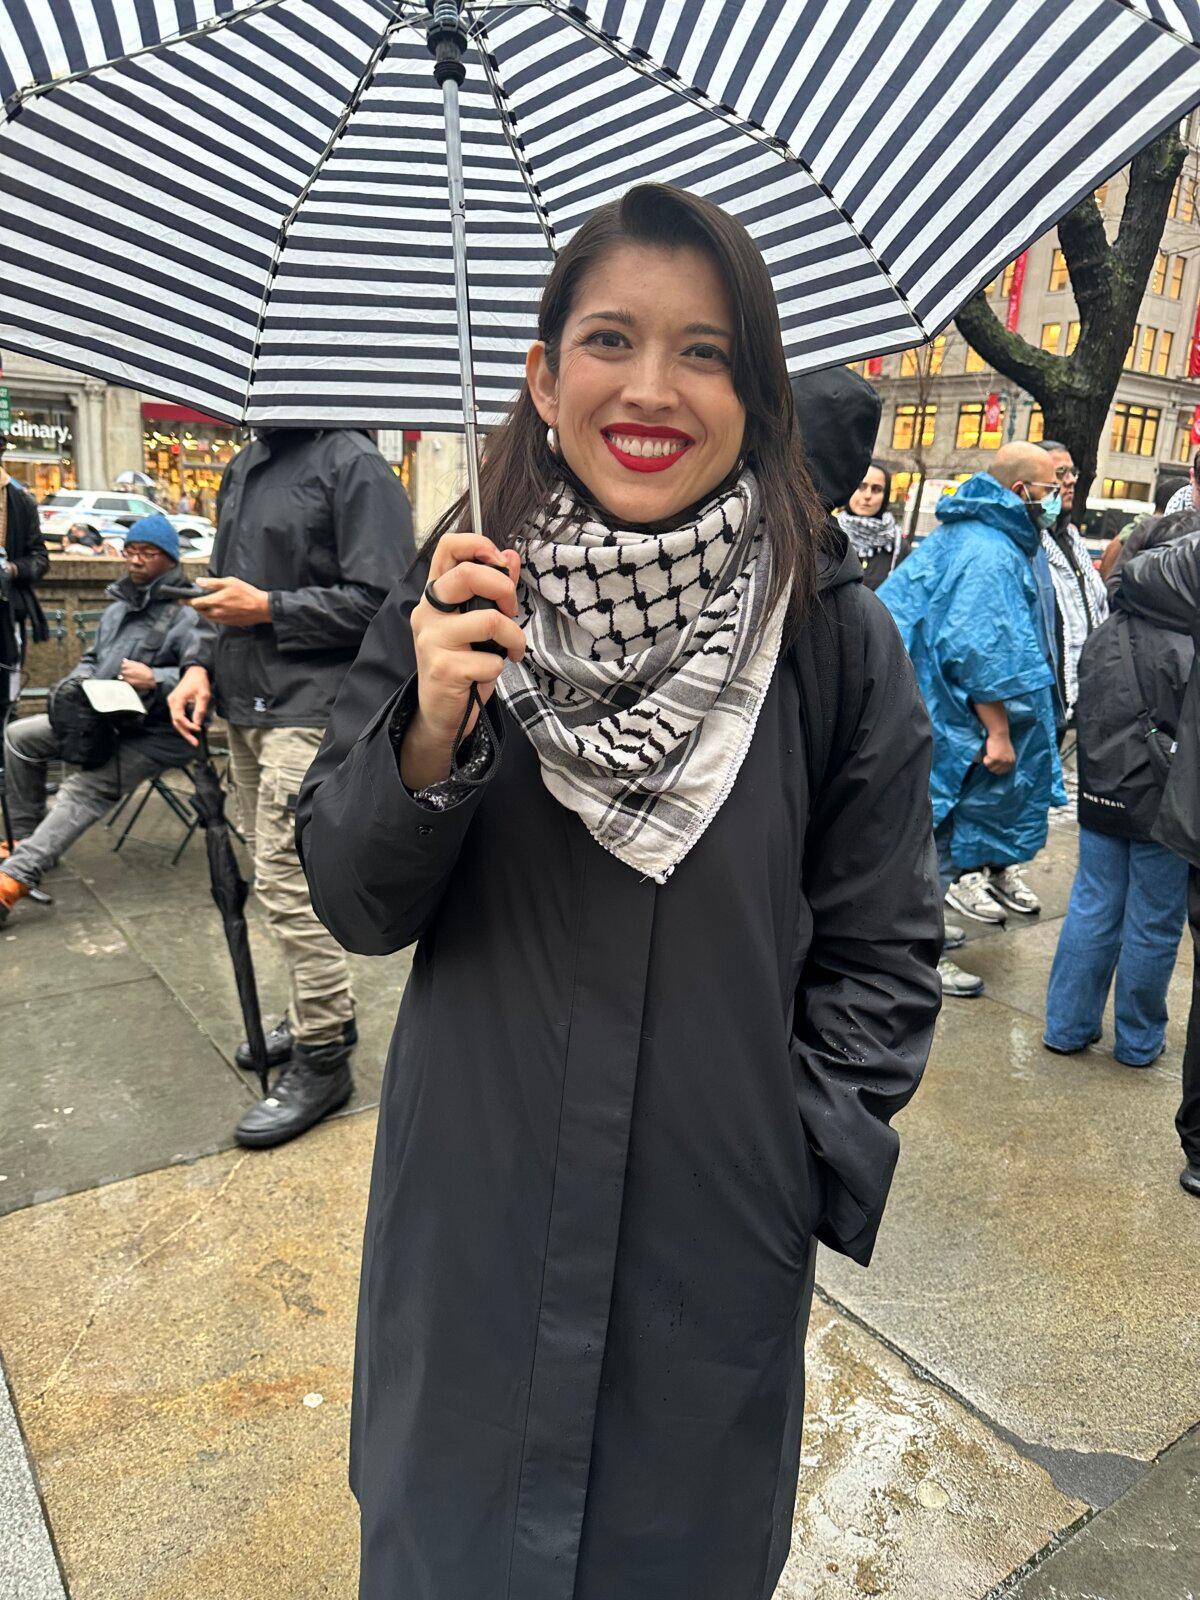 Karina Garcia, Socialist Party candidate for vice president, attends the "Abandon Biden" rally in New York on March 28, 2024. (Juliette Fairley/The Epoch Times)